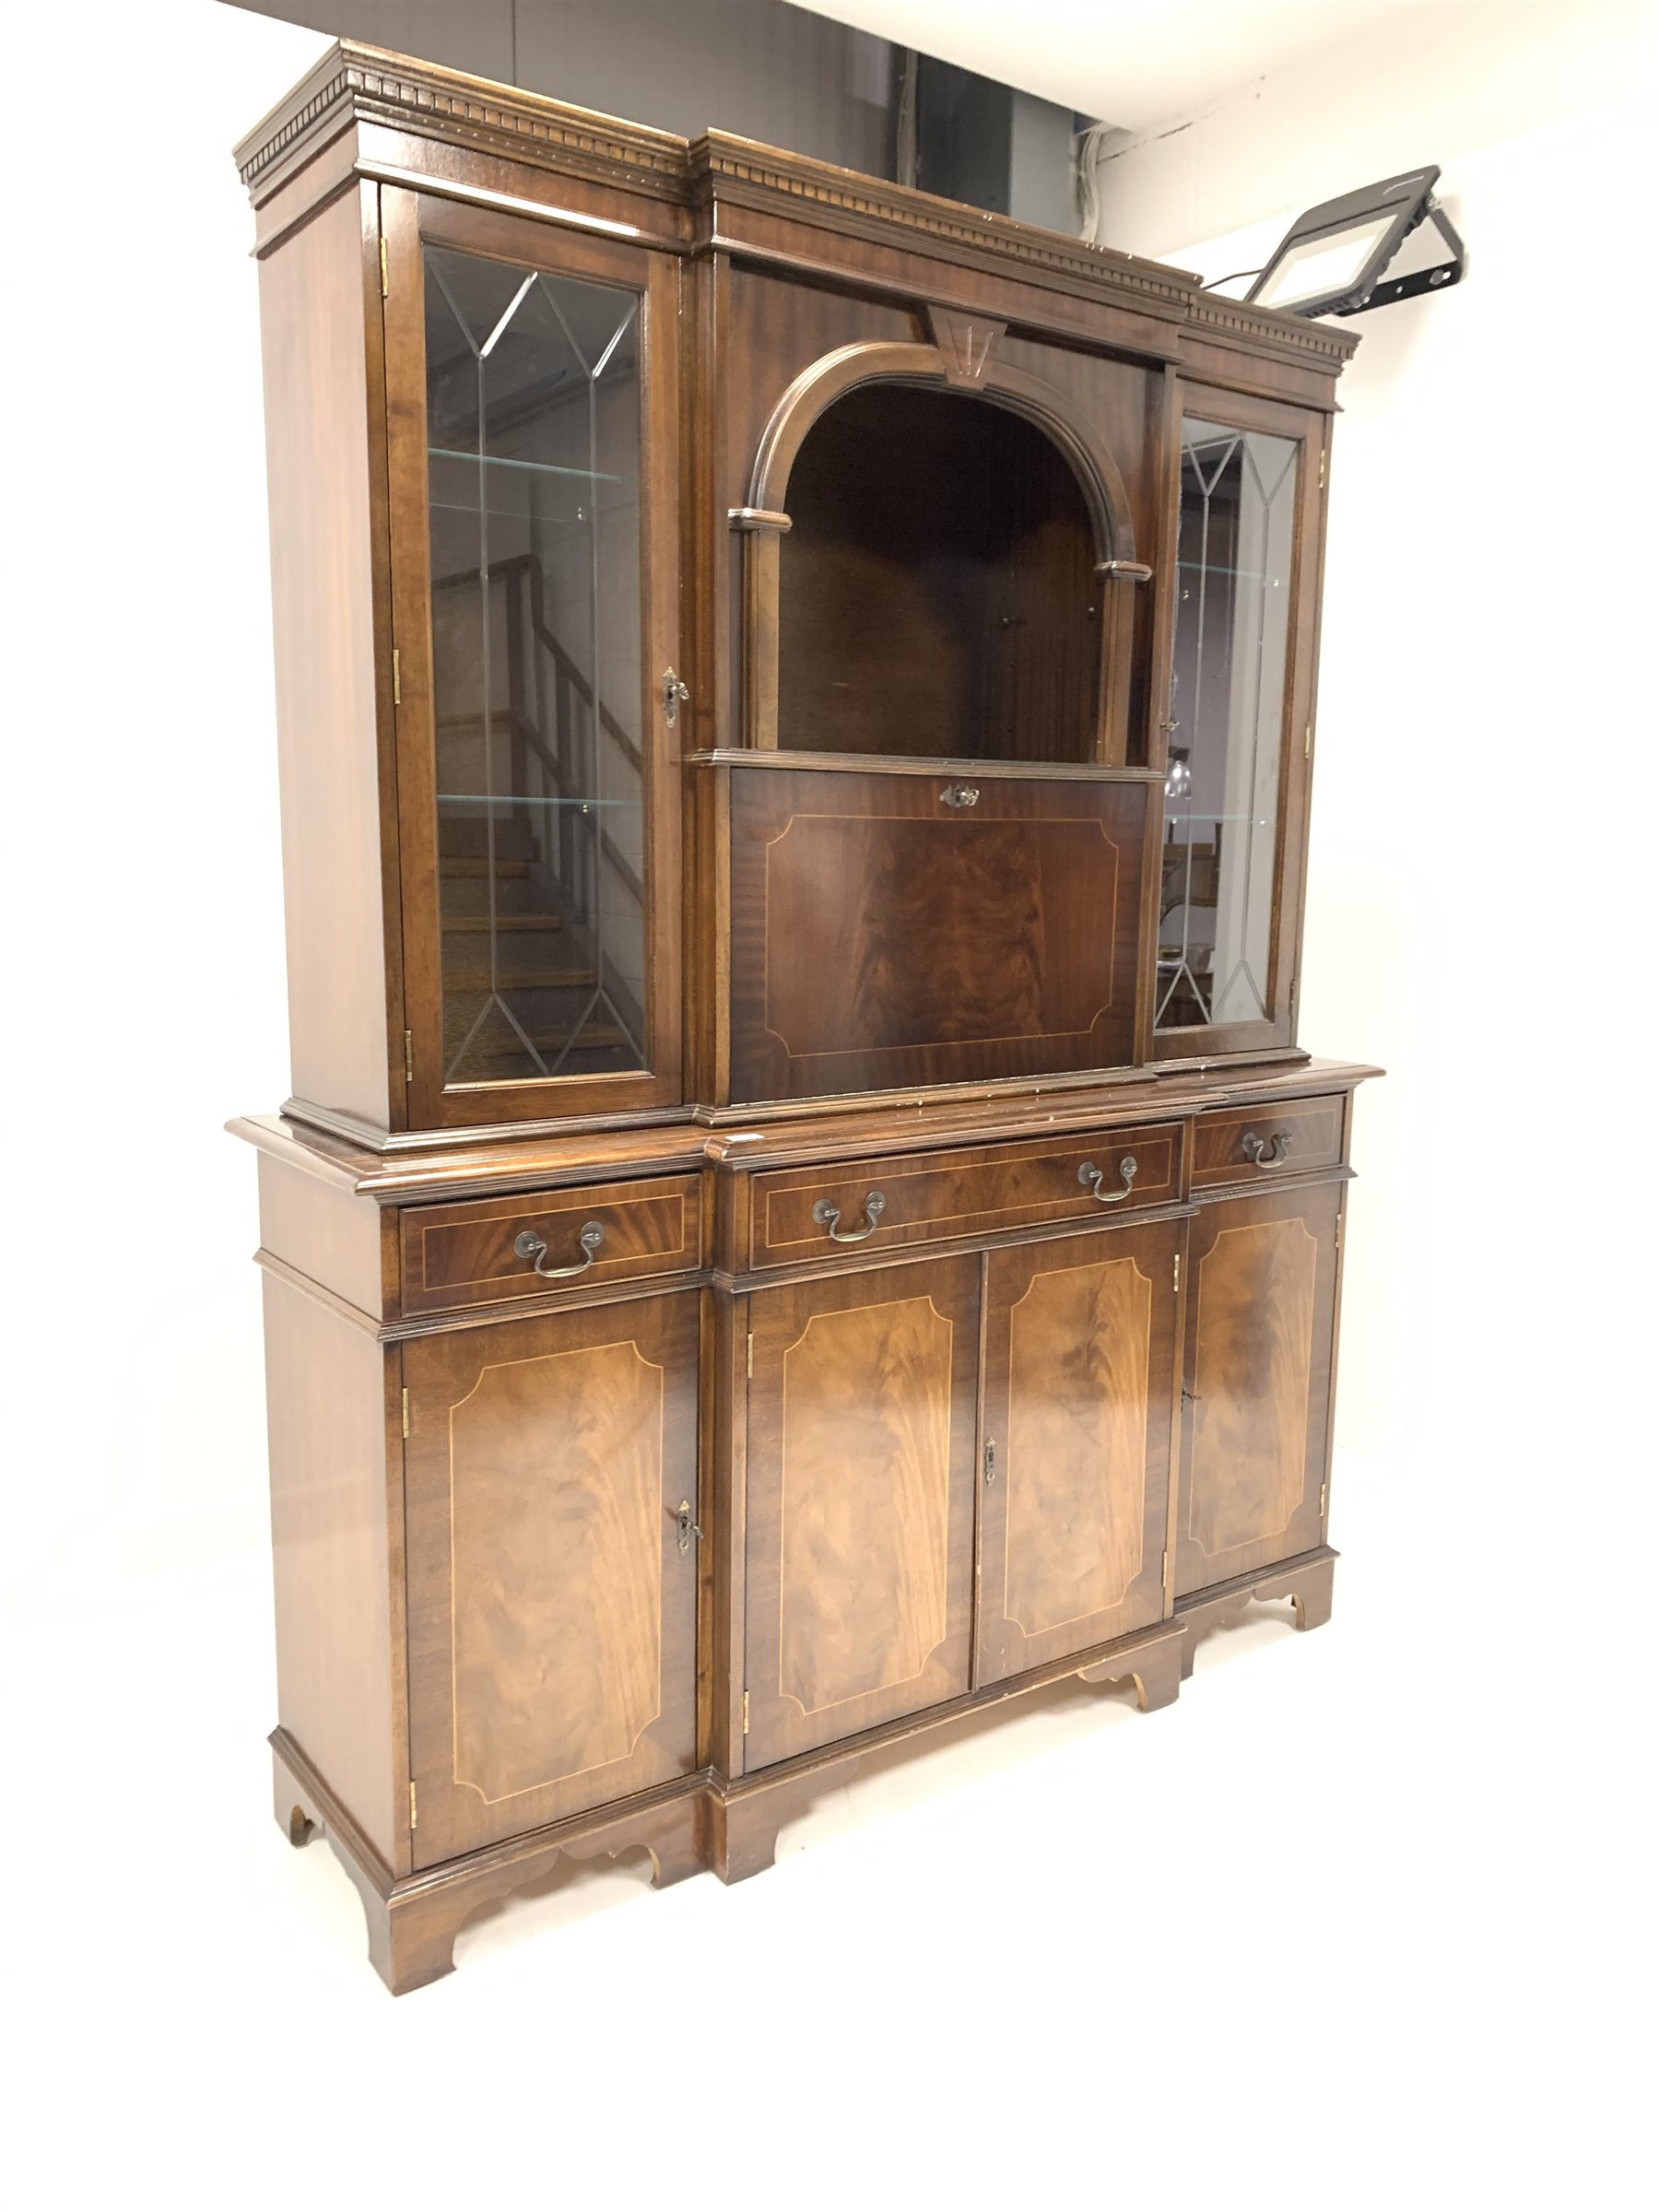 Reproduction mahogany breakfront illuminated cocktail display cabinet, with dentil cornice over glaz - Image 2 of 3